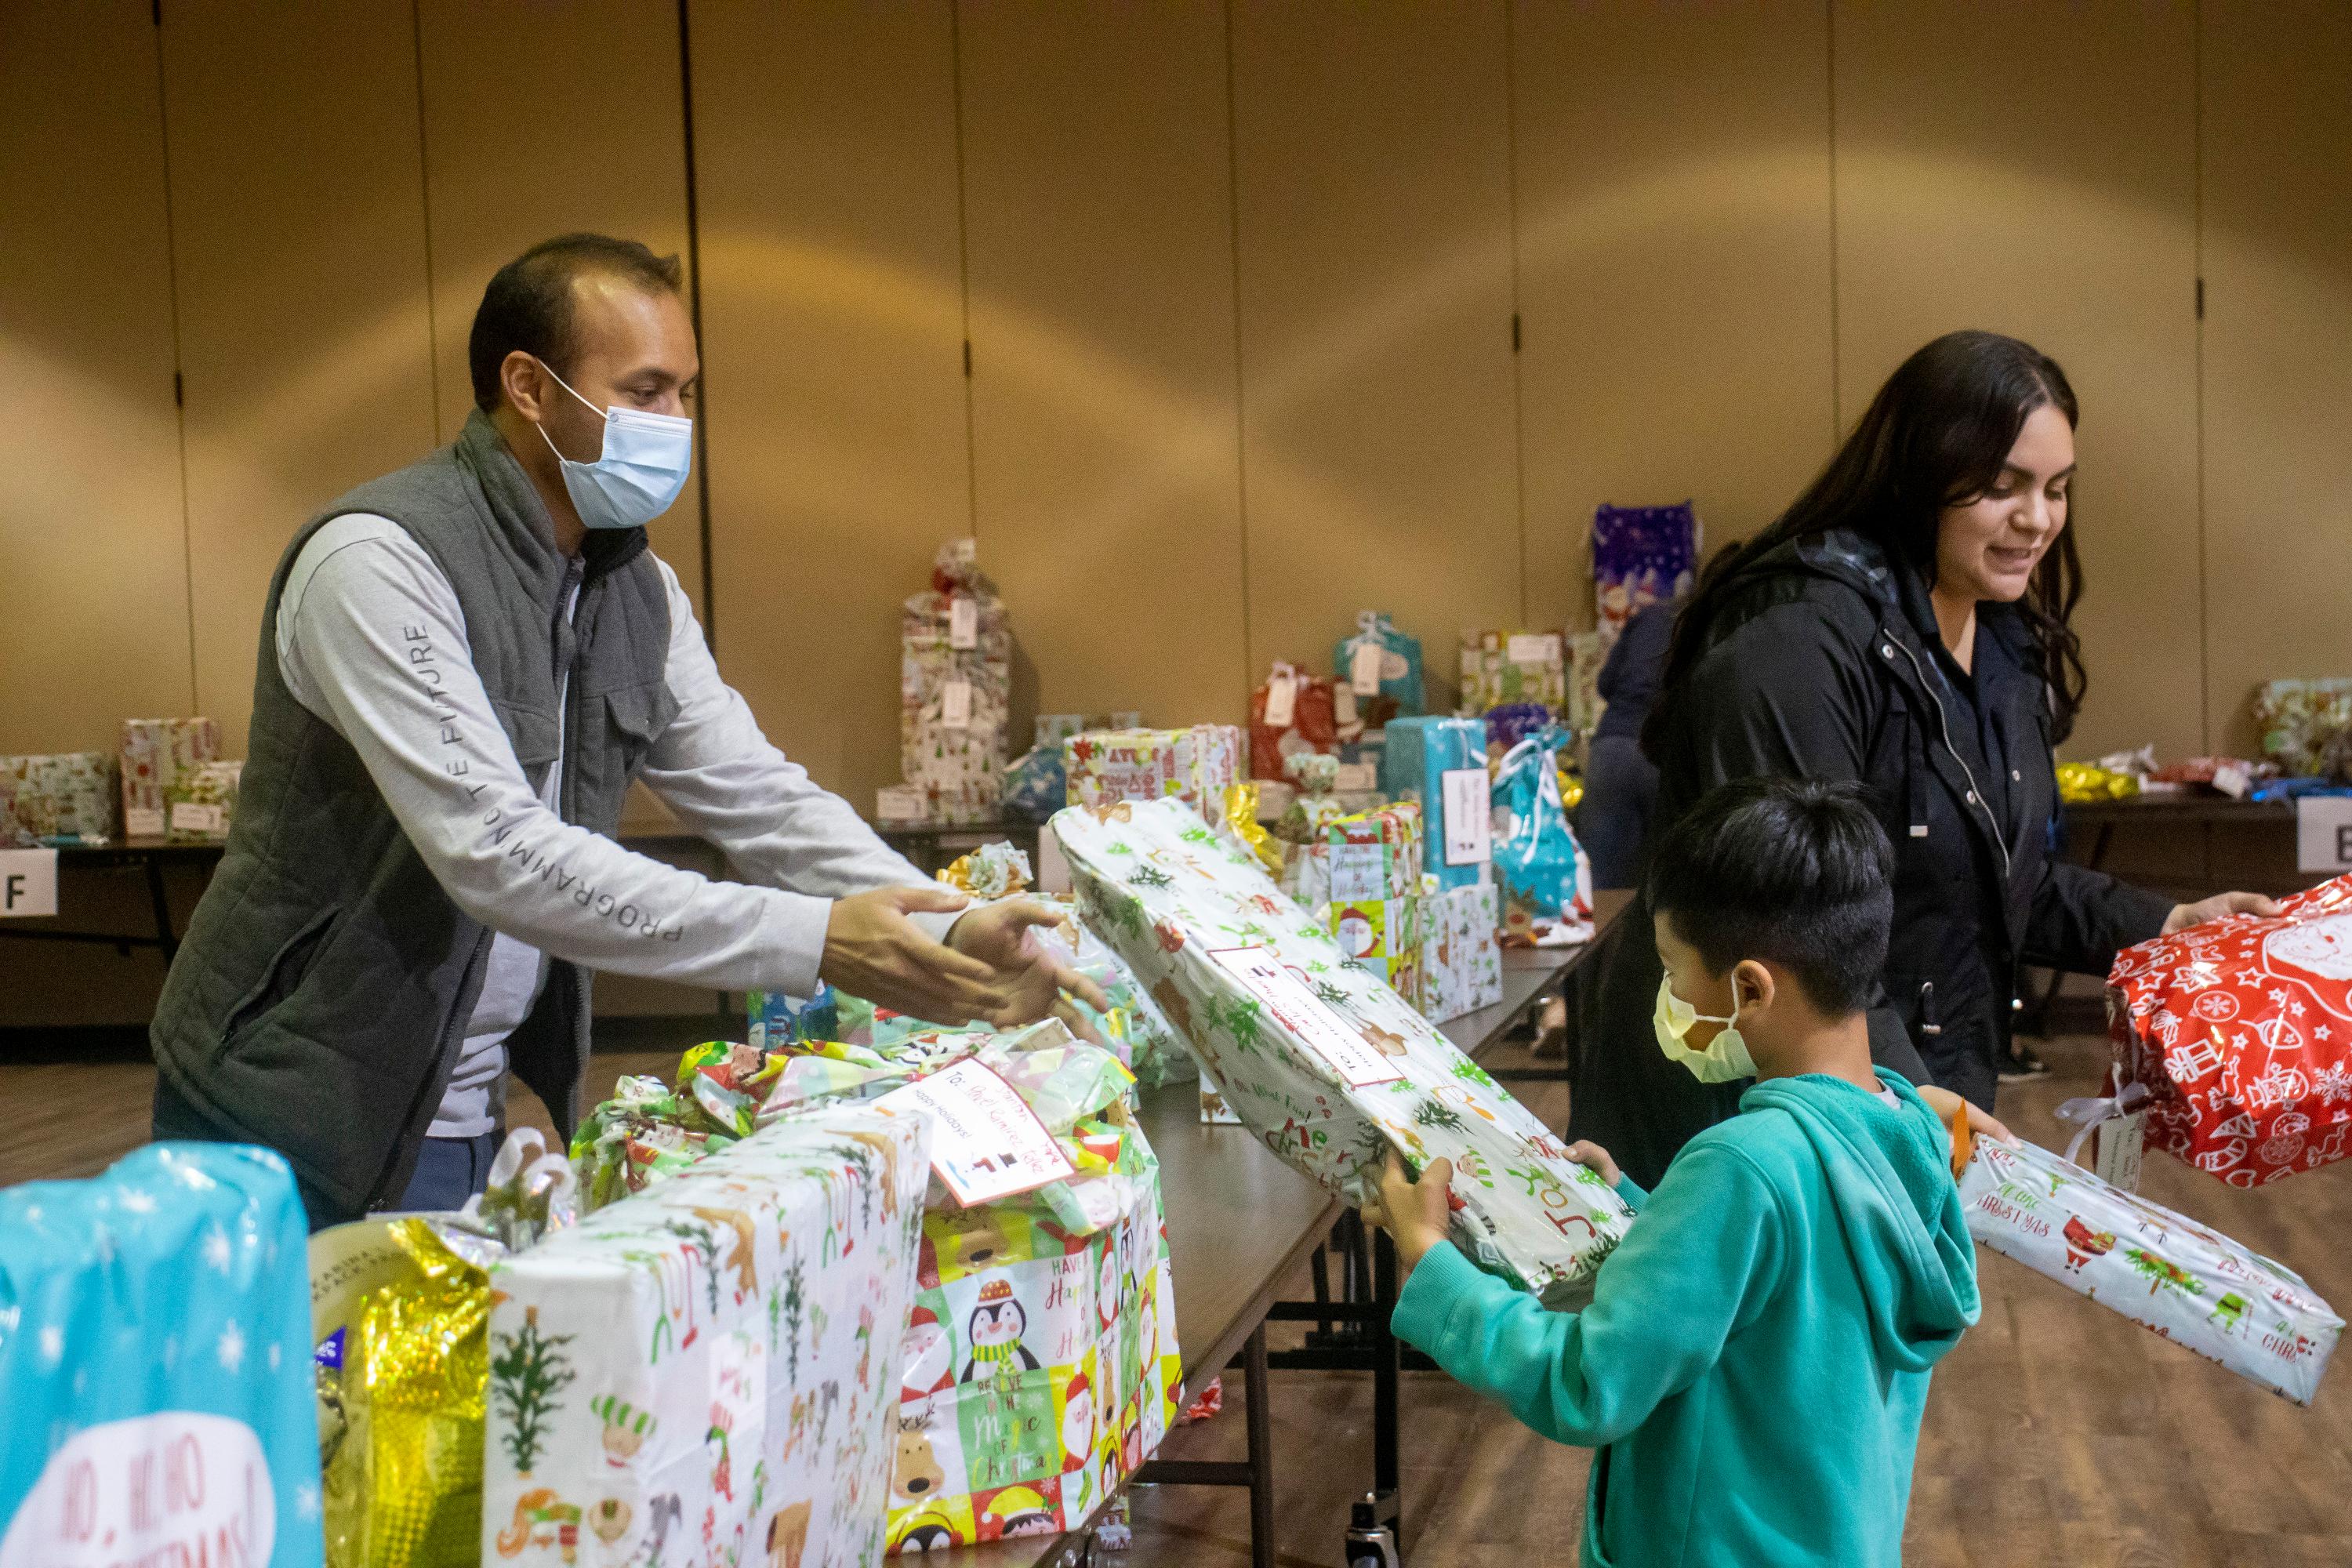 CEO of Dreams for Schools, Nithin Jilla and Stanton Community Services Coordinator, Dianna Valtierra hands out gifts to Stanton children as part of the Katrina's Backpack program.